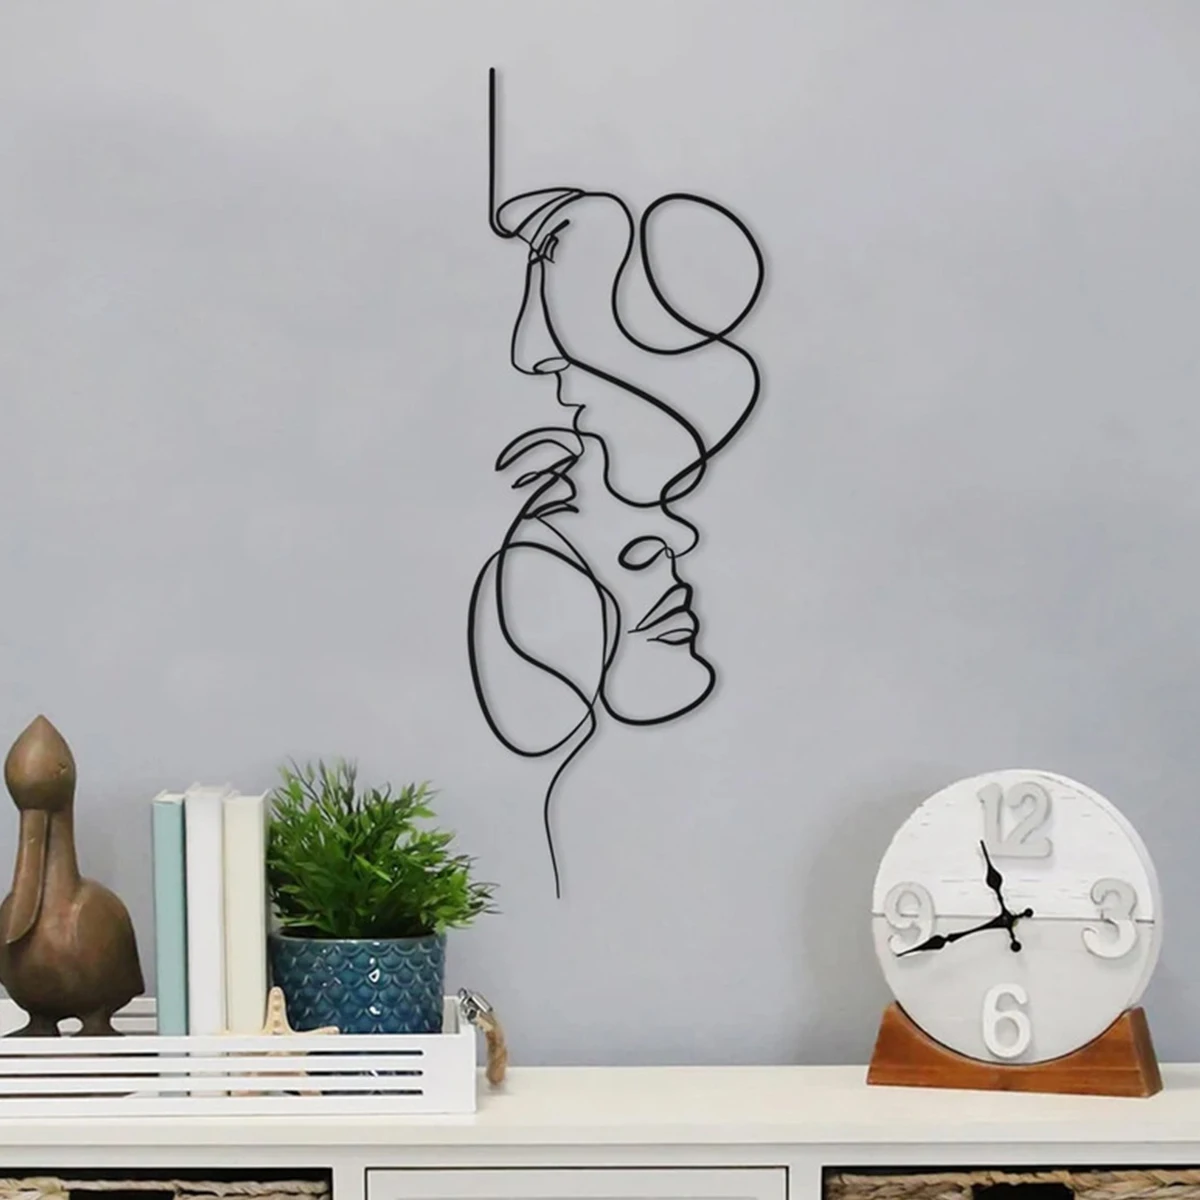 Black Metal Wall Art Wall Hanging Decor Abstract Iron Wall Sculpture Minimalist Facial Line Home Decoration Crafts